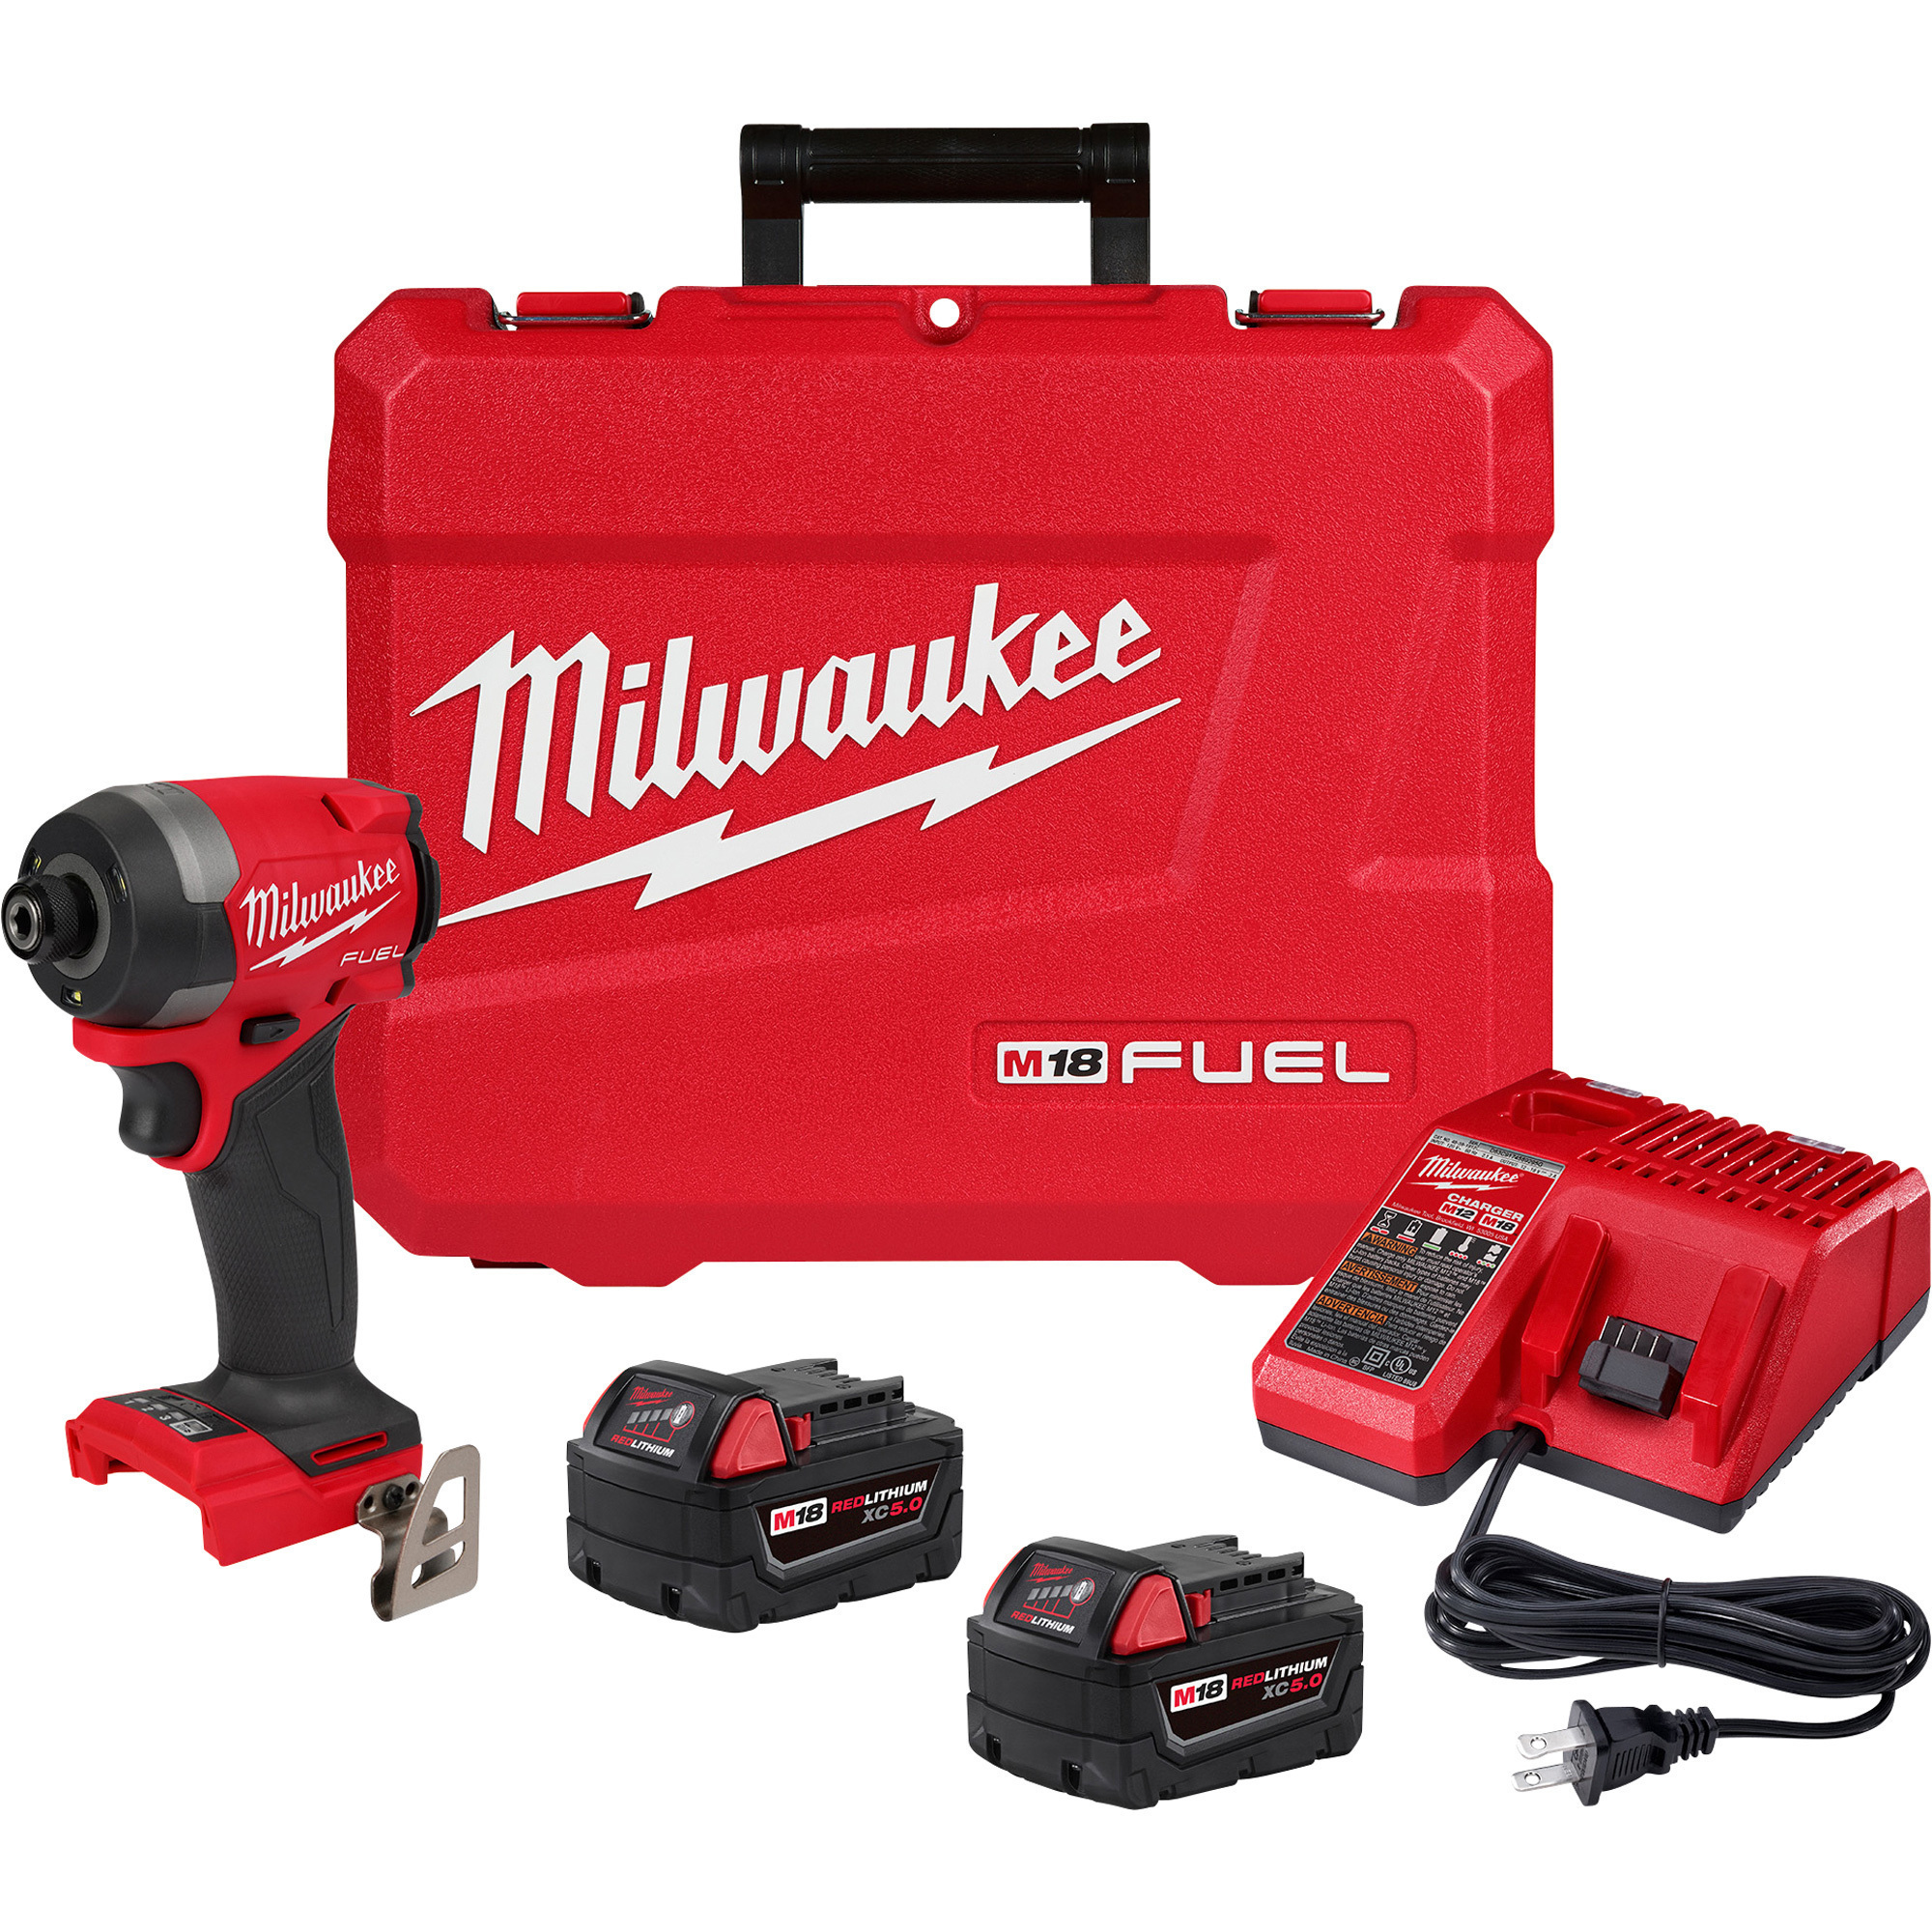 Milwaukee M18 FUEL 1/4Inch Hex Impact Driver Kit, Tool with Battery Pack and Charger, Model 2953-22